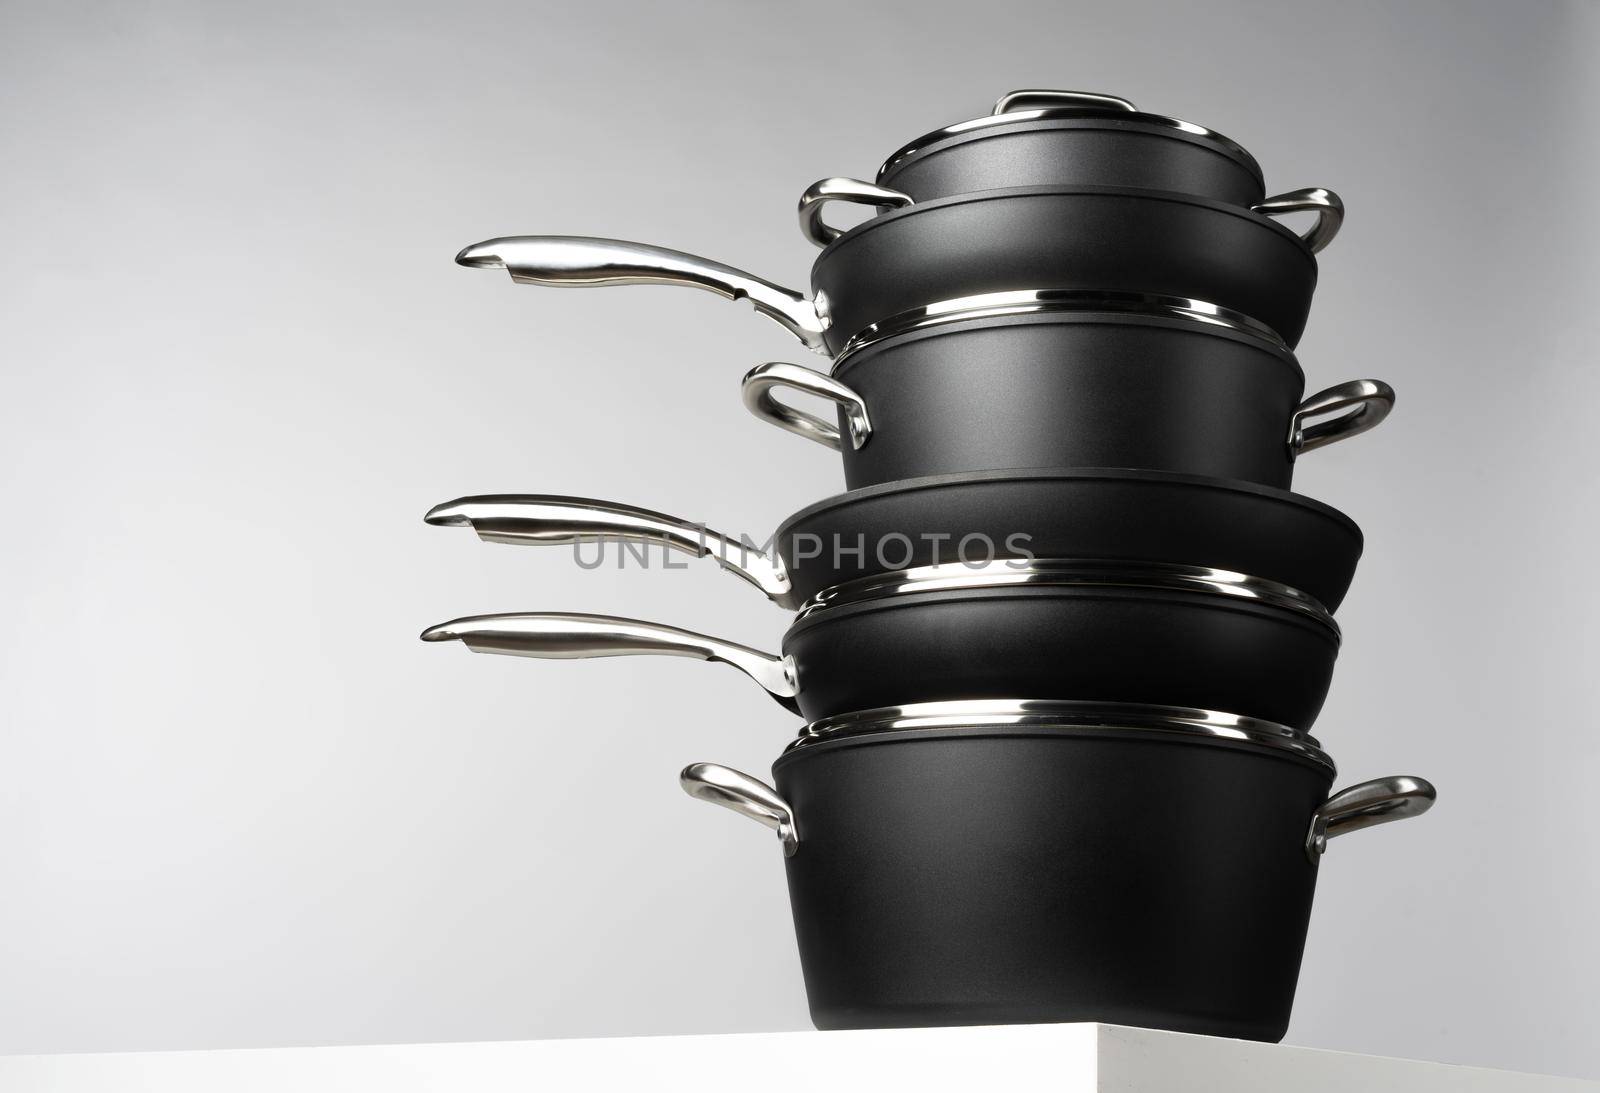 New domestic cookware on grey background close up by Fabrikasimf